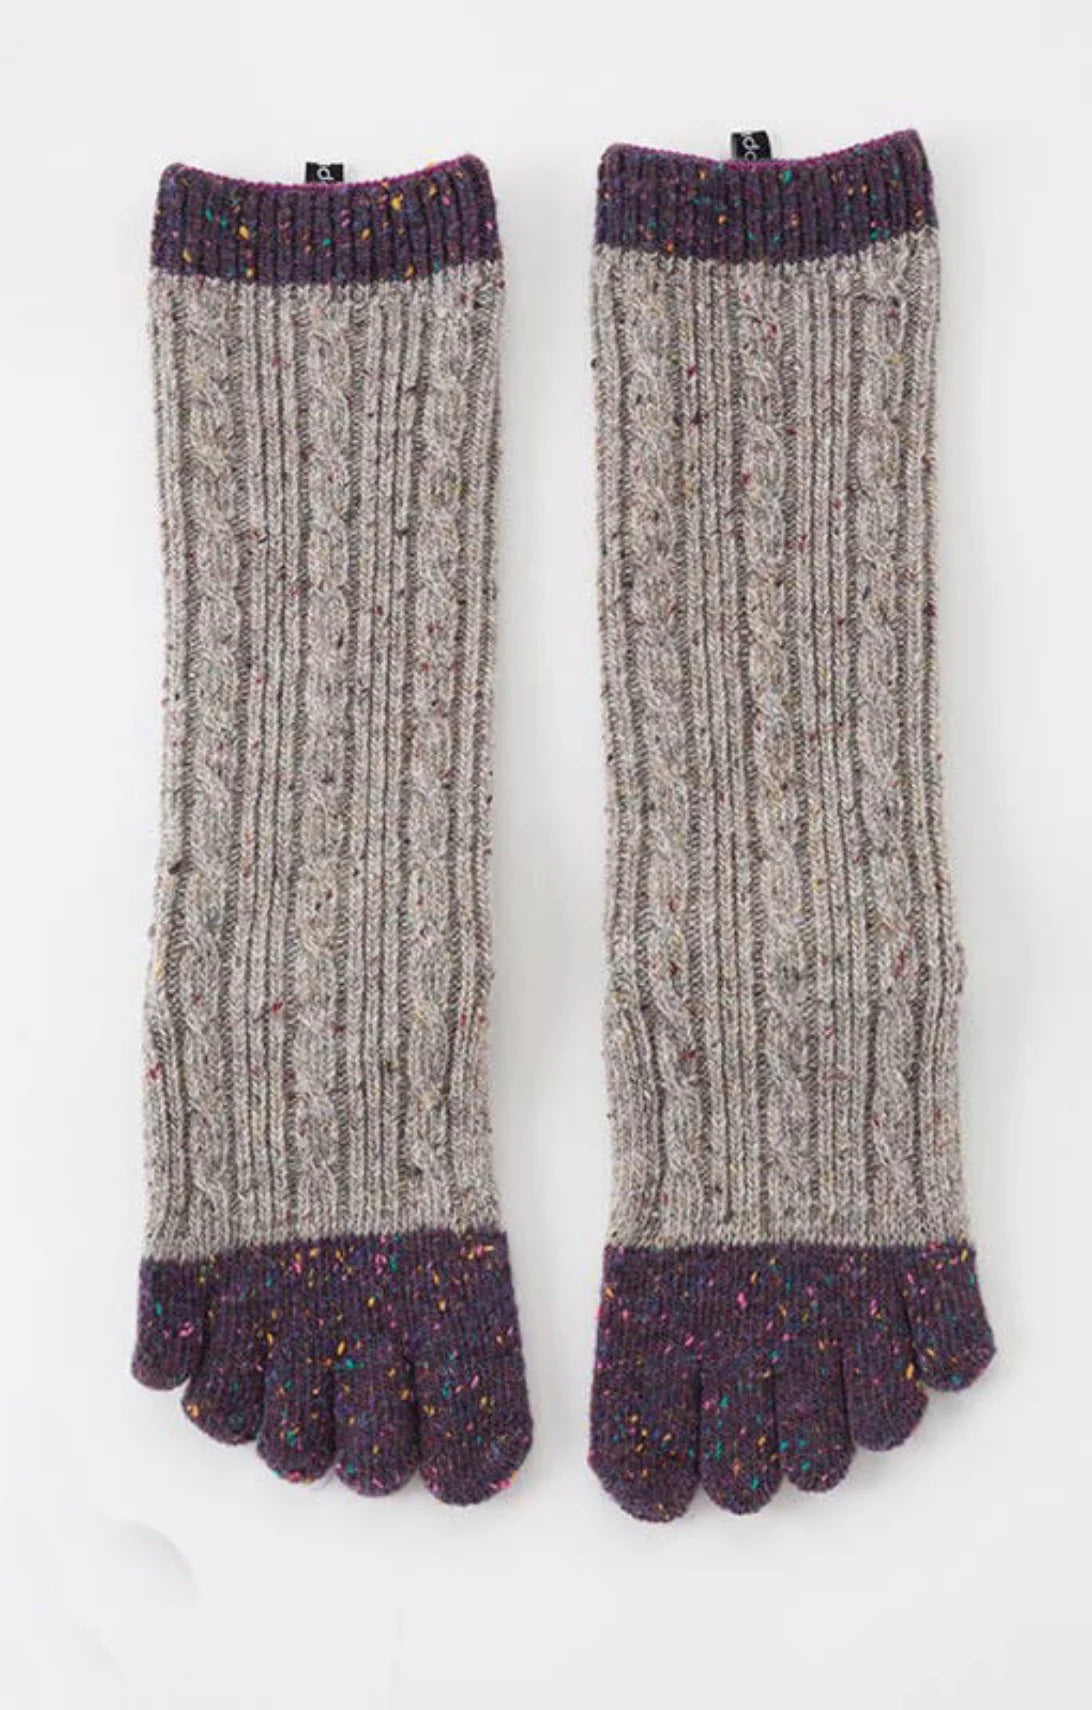 Knitido plus's Wool Blend Cable Confetti Midcalf Socks in Grey color